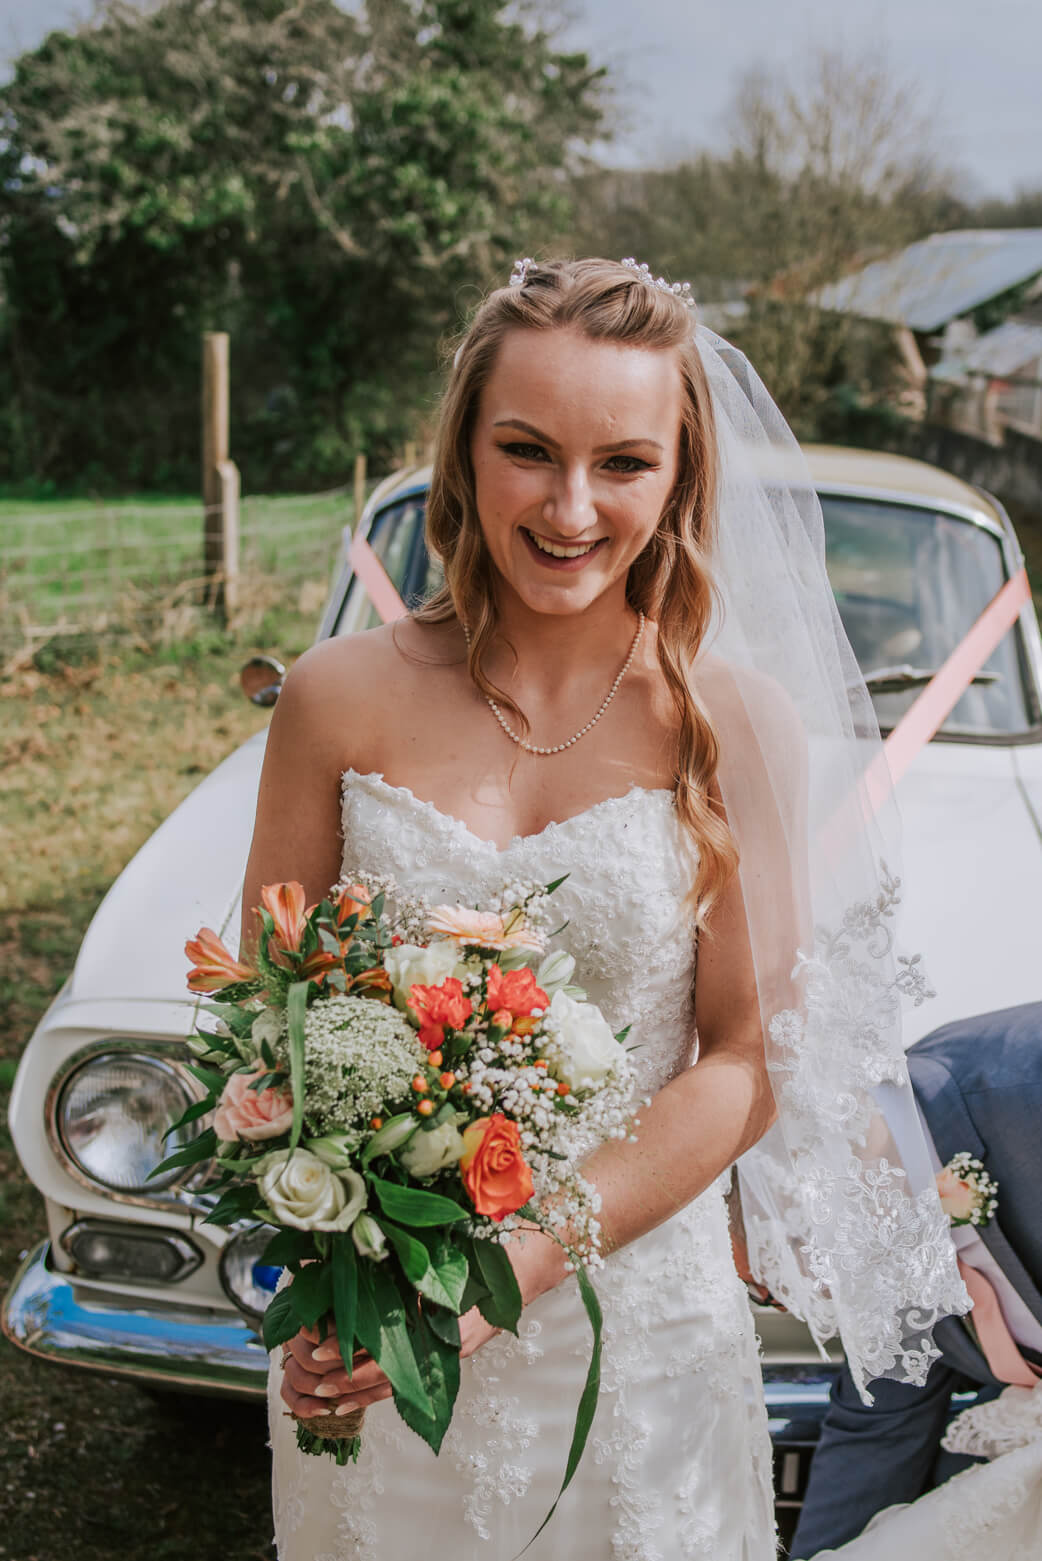 Emma and Damian's wedding, Rose in Vale, Cornwall Photography by Arianna Fenton